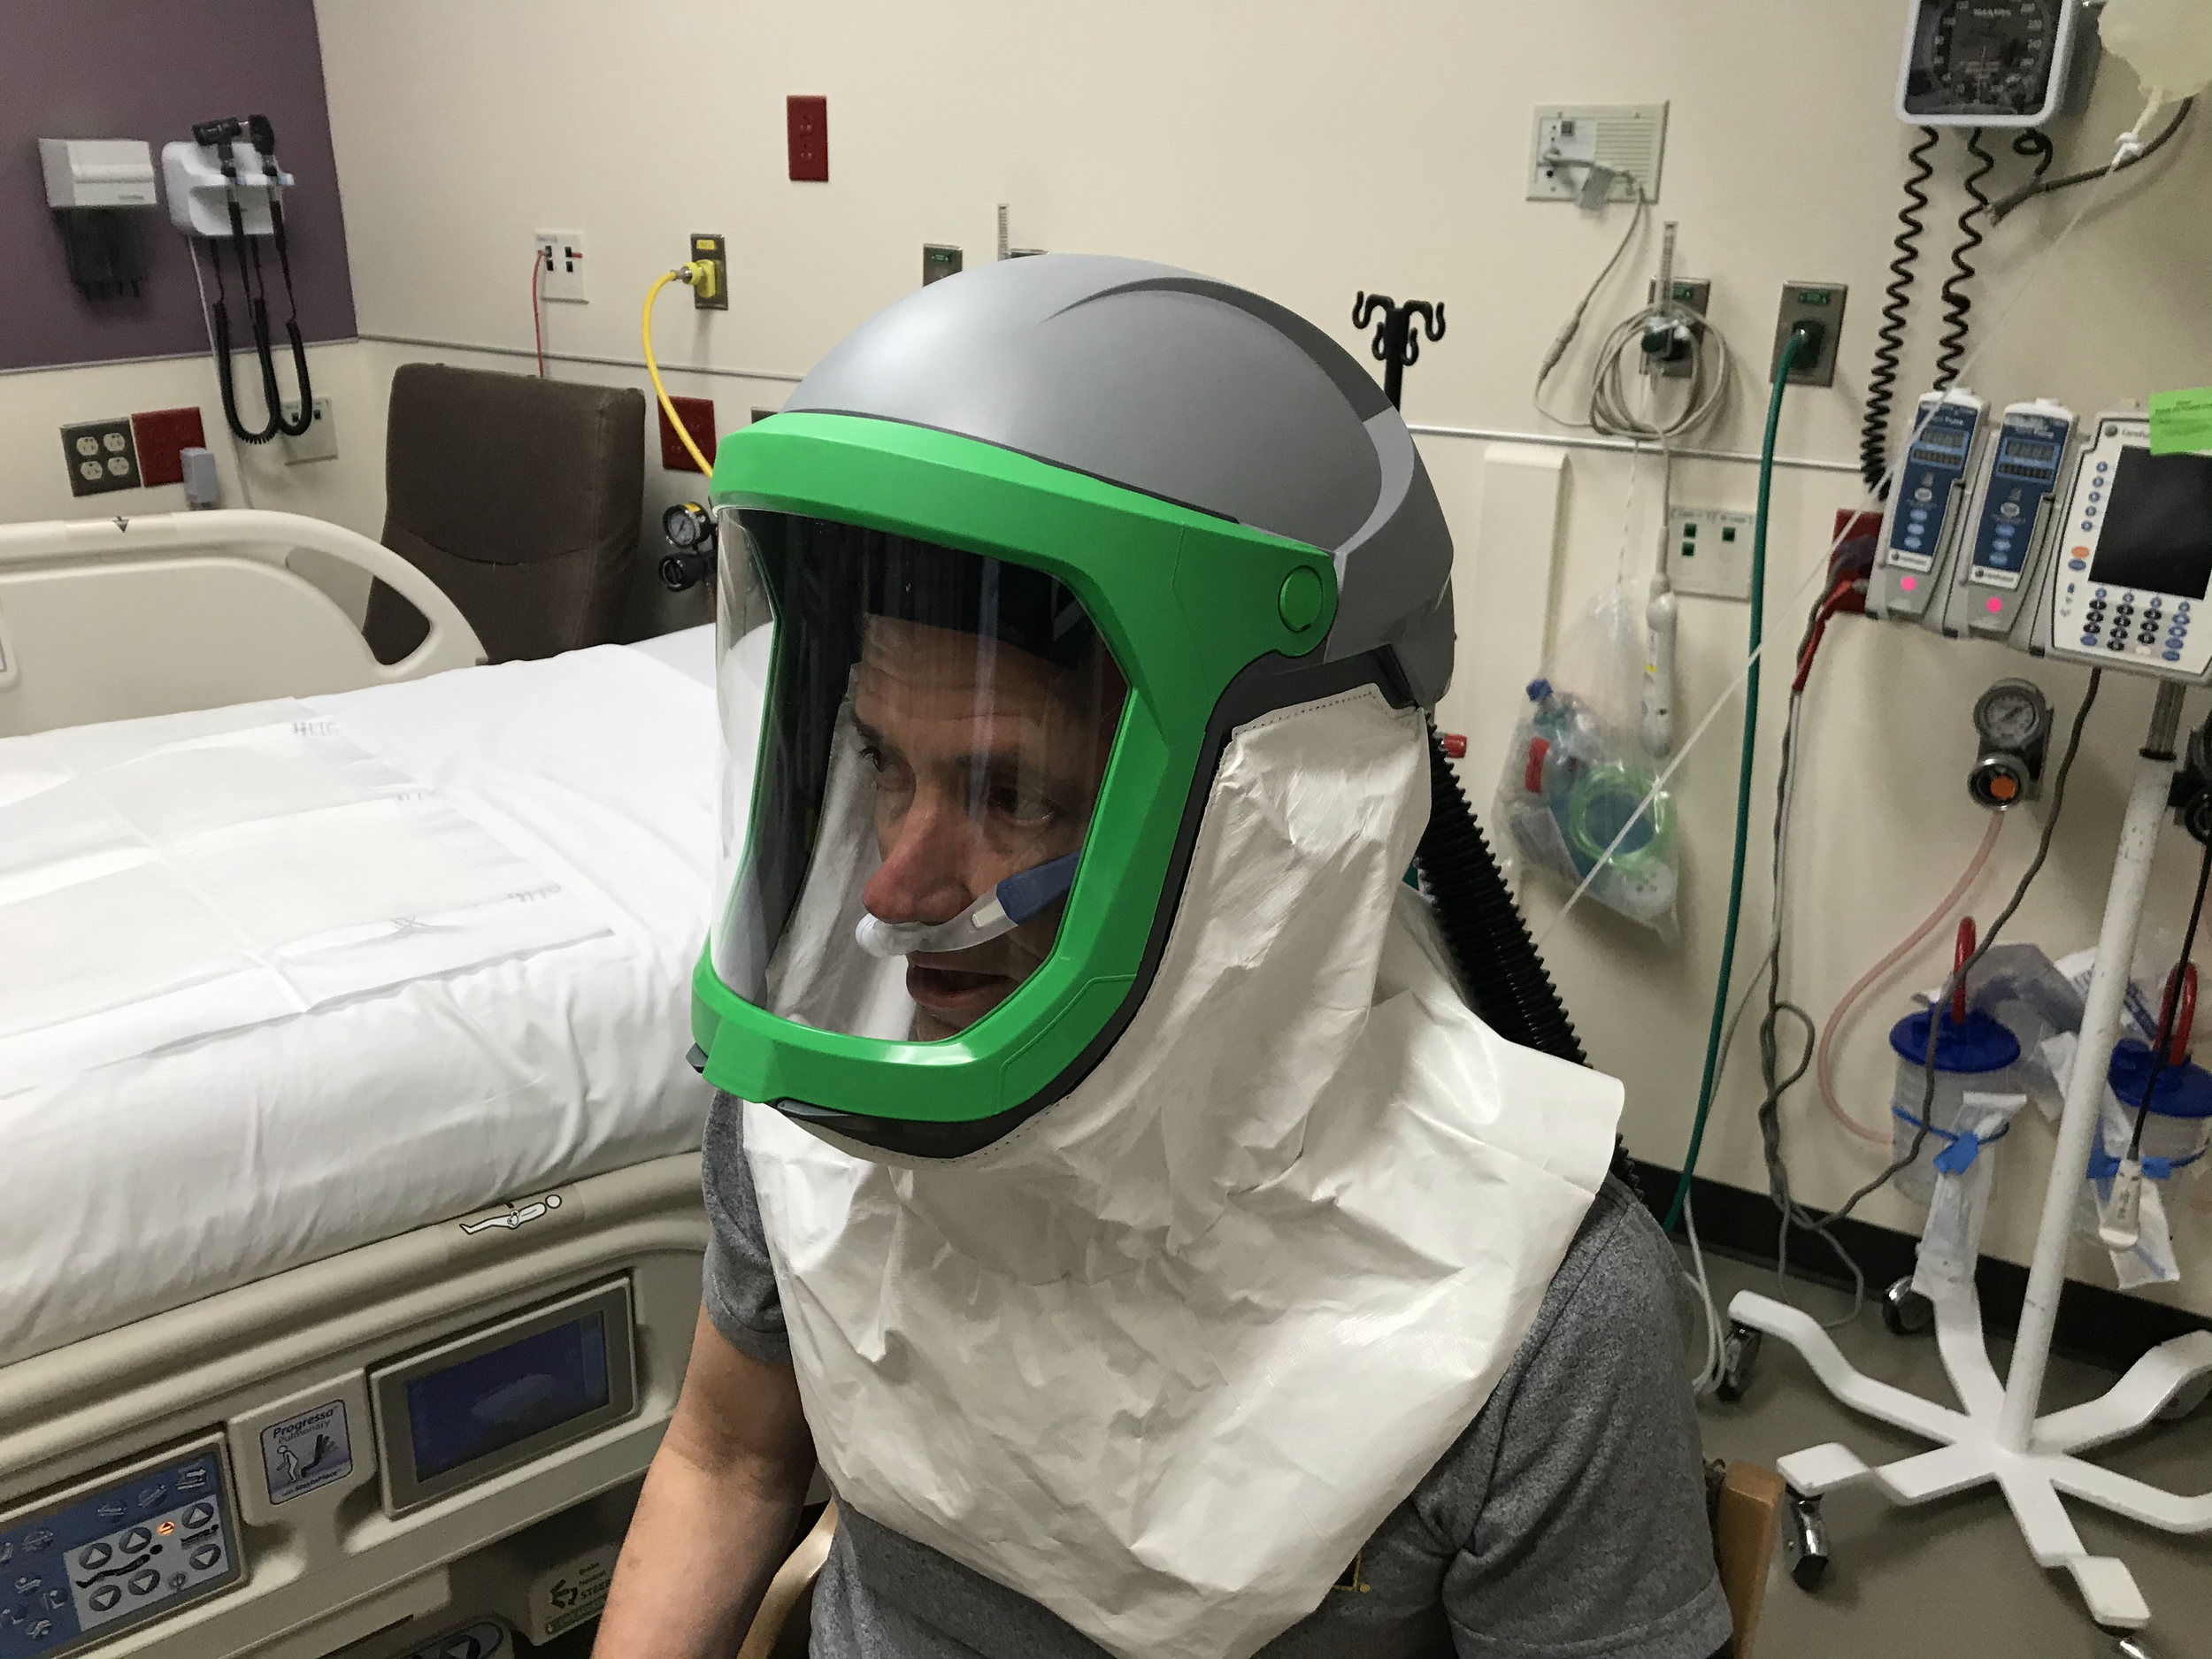  Dr. Kevin Ward tests the negative pressure helmet system. Preliminary data shows airflows through the hood approach 320 liters/minute, which is more than 20 times greater than the air exchanges produced by a negative pressure room. 